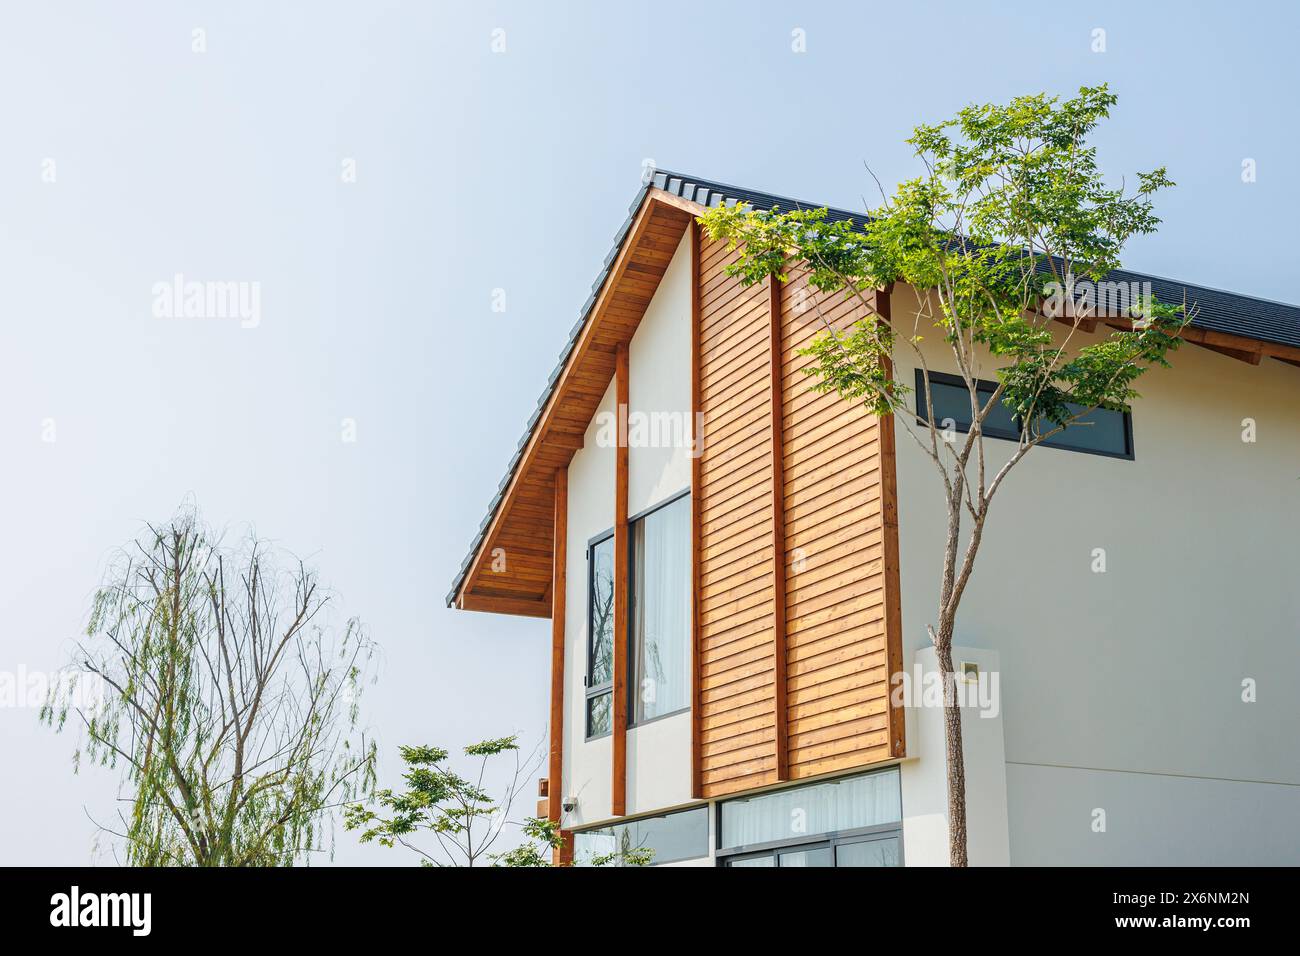 green eco home wood material with garden green plant tree around the building, living with nature for saving energy cooling house Stock Photo